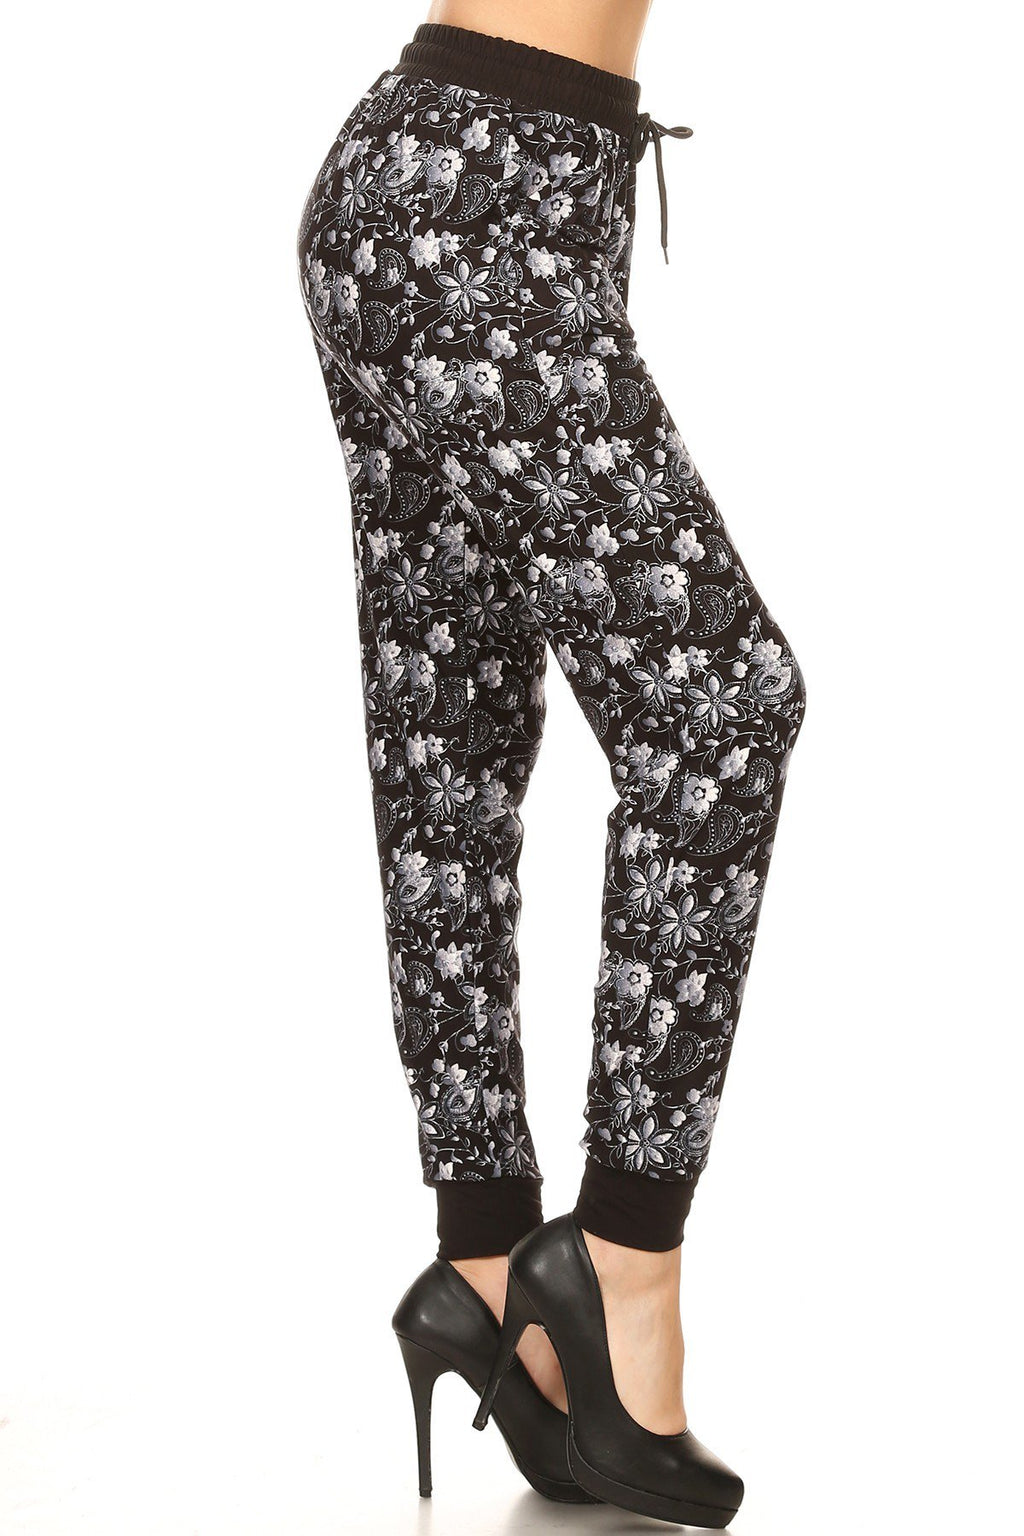 MIXED FLORAL PAISLEY joggers with solid trim, drawstring waistband, waist pockets, and cuffed hems